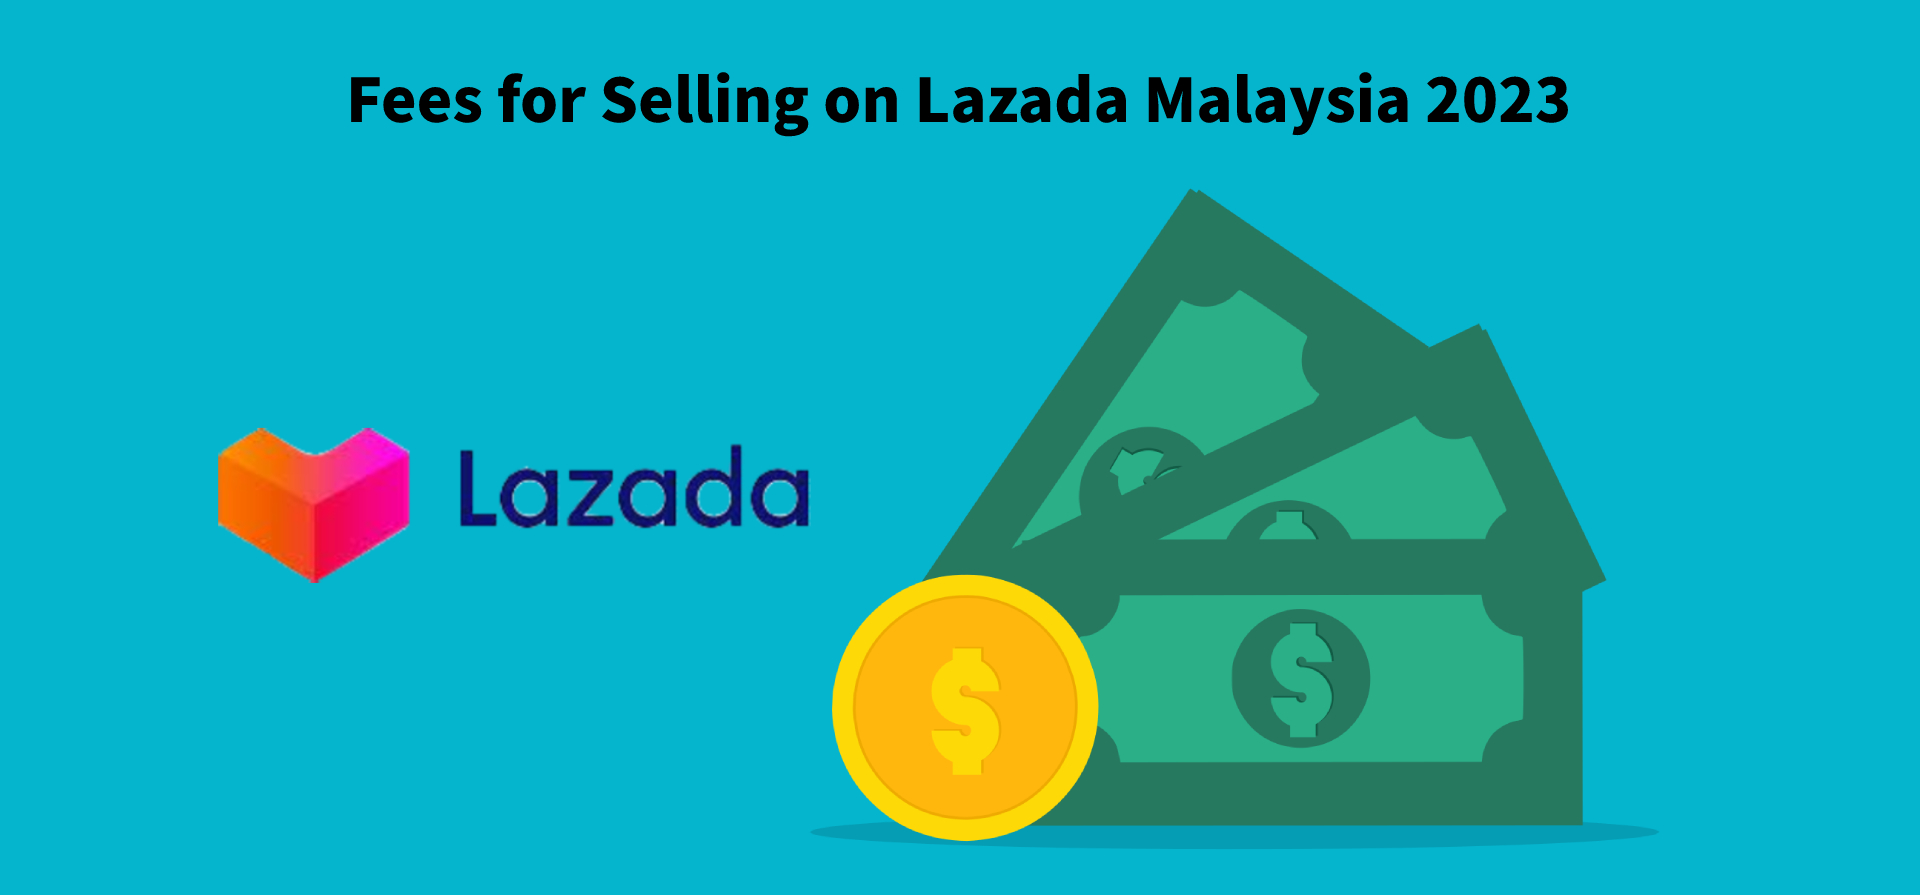 Fees for Selling on Lazada Malaysia 2023